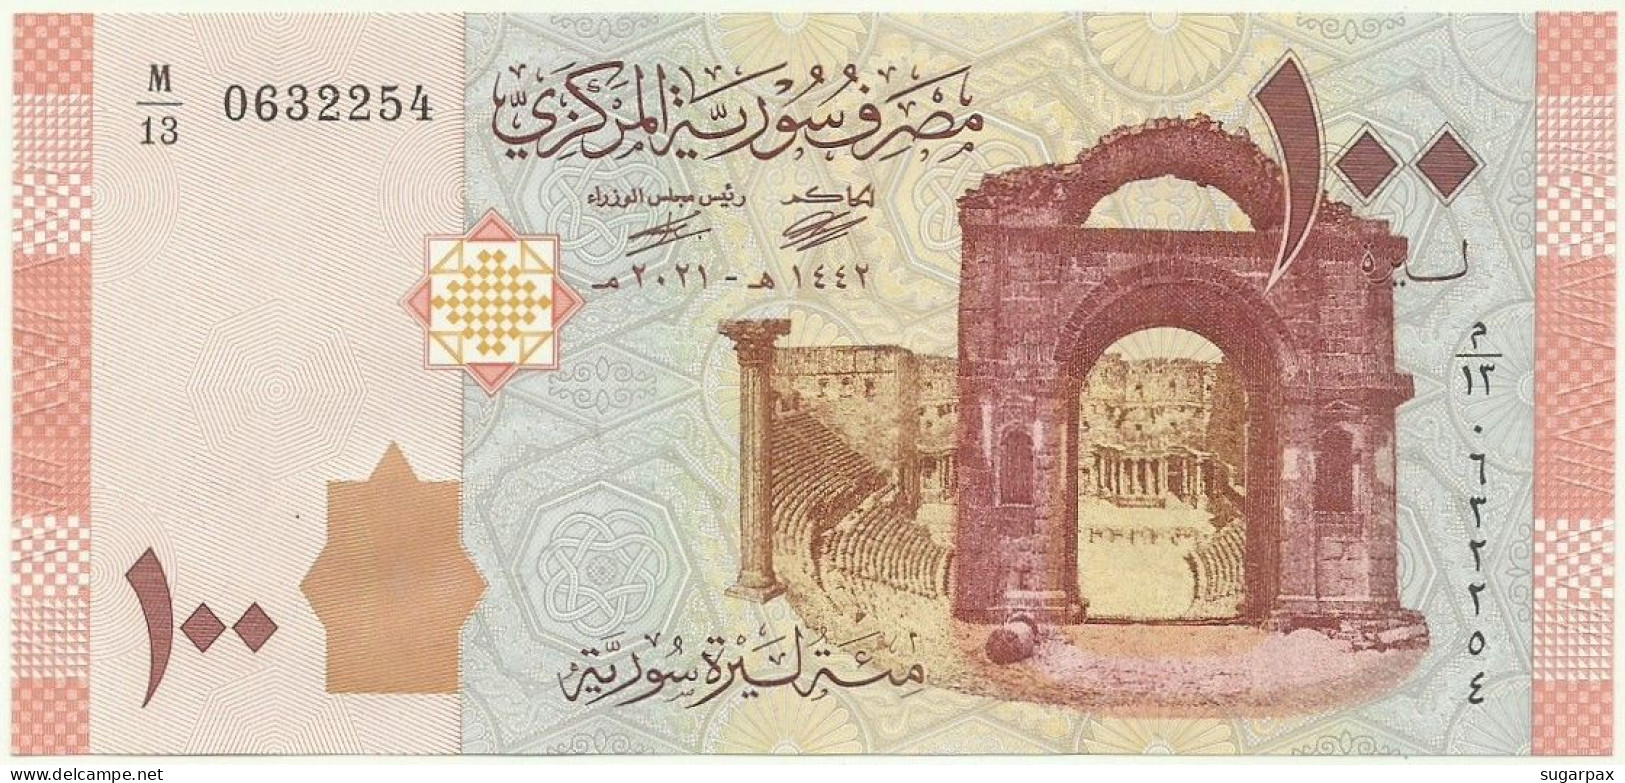 Syria - 100 Syrian Pounds - 2021 / AH 1442 - Pick 113.NEW - Unc. - Serie M/13 - Syrien